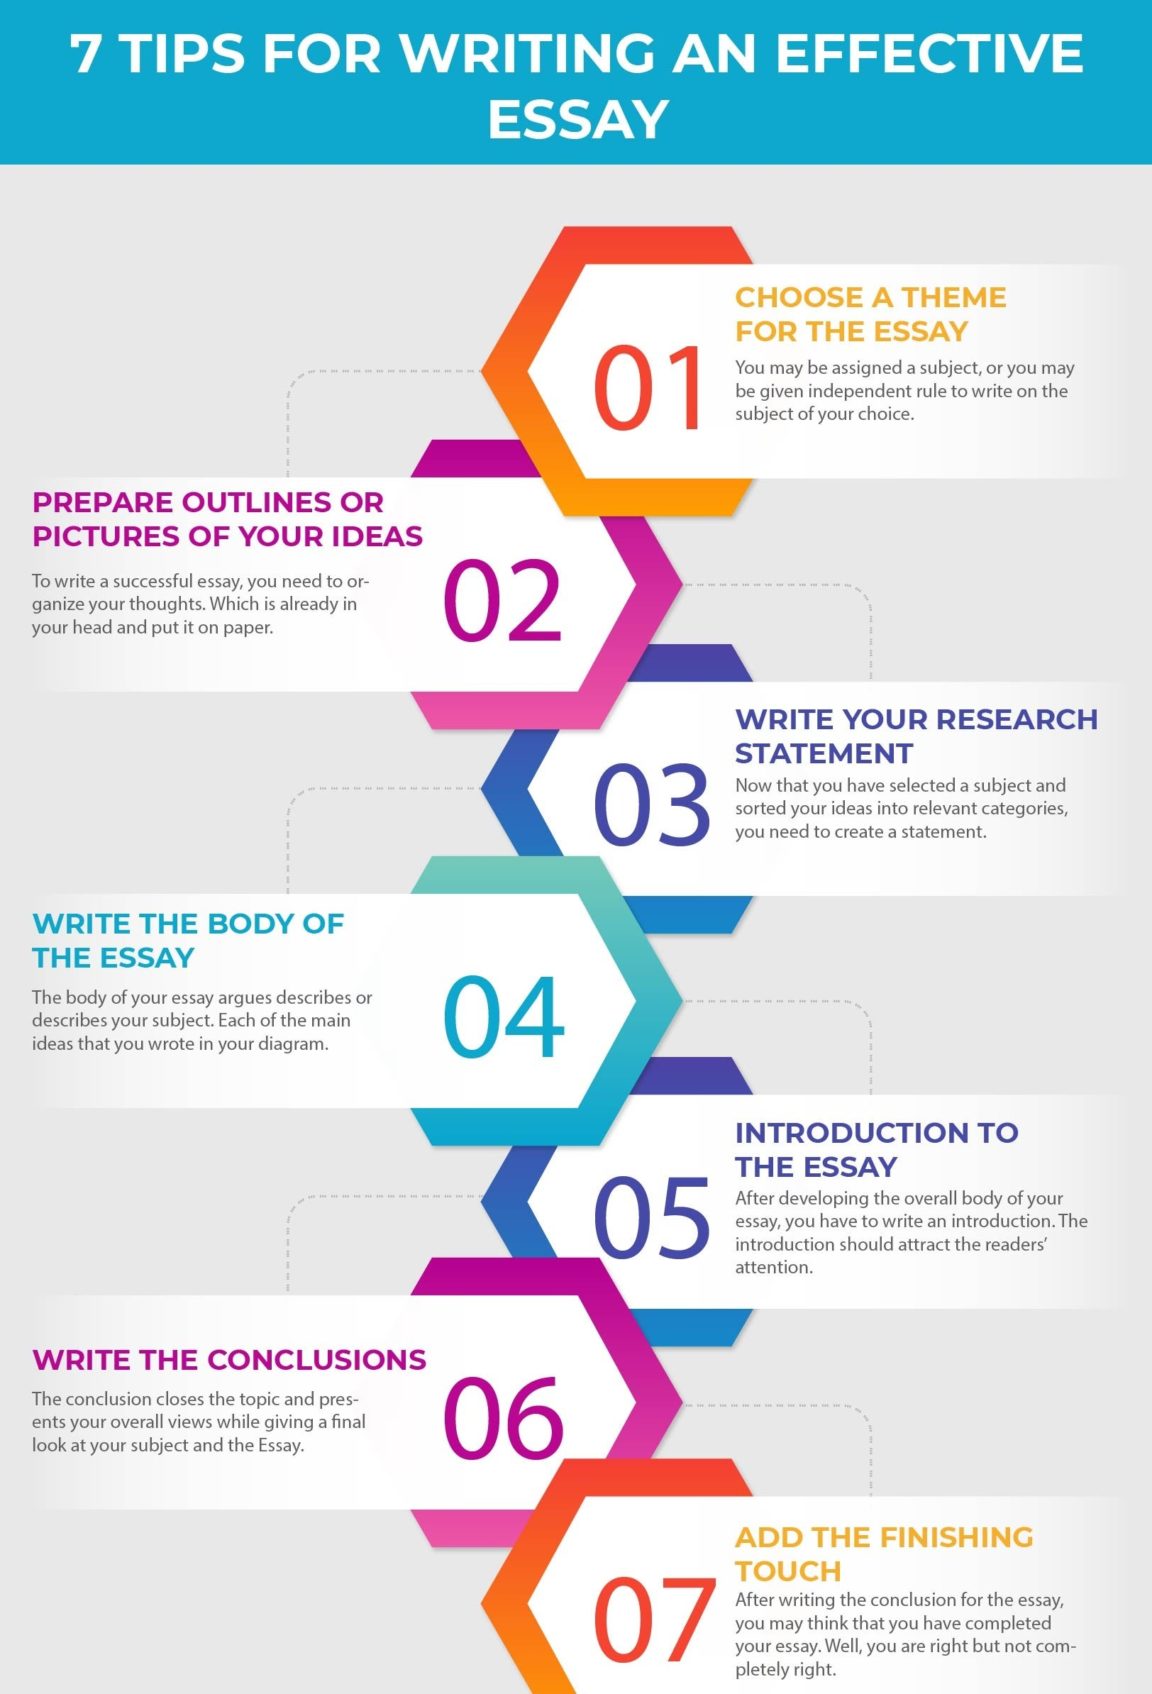 what are the steps to follow when writing an essay